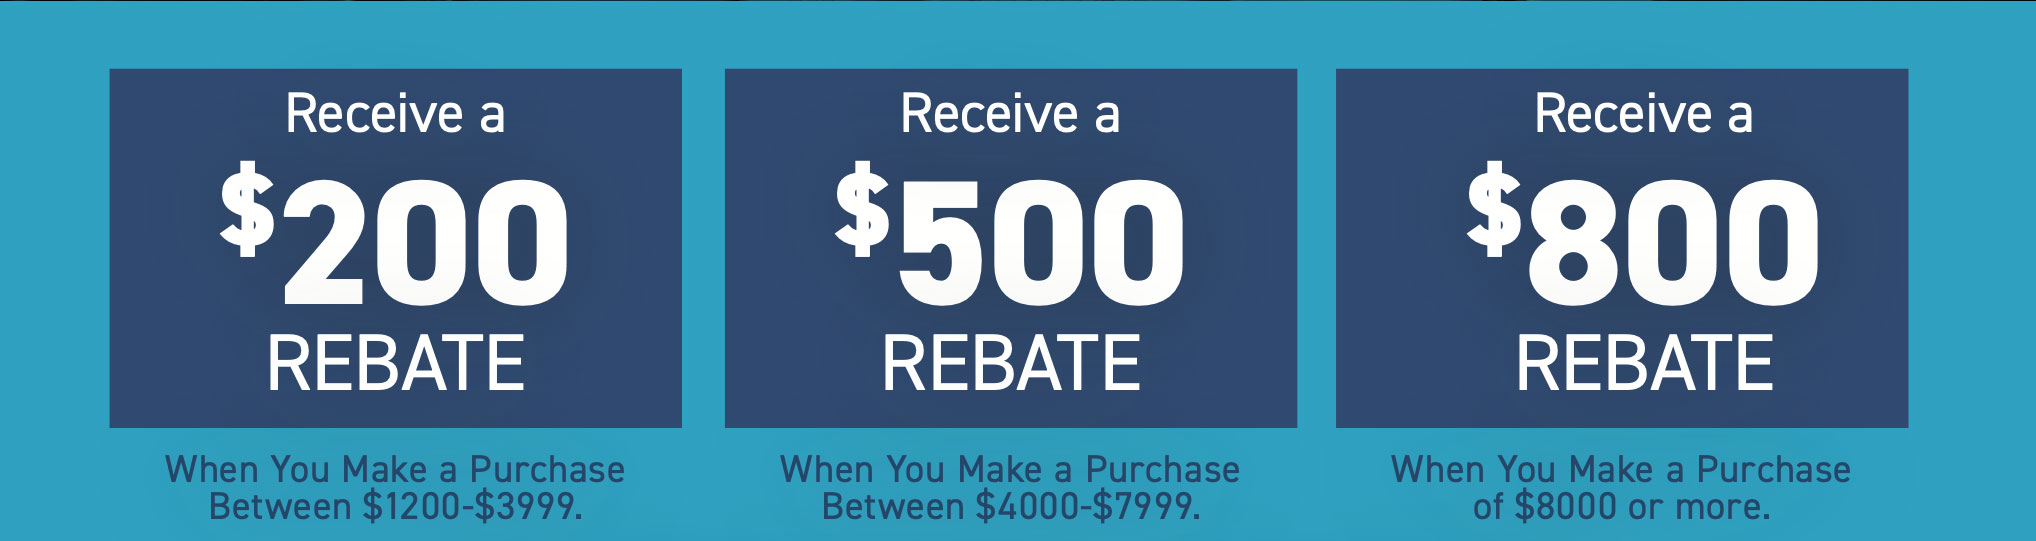 Act NOW to get your Dreaming of Summer Rebate Offer